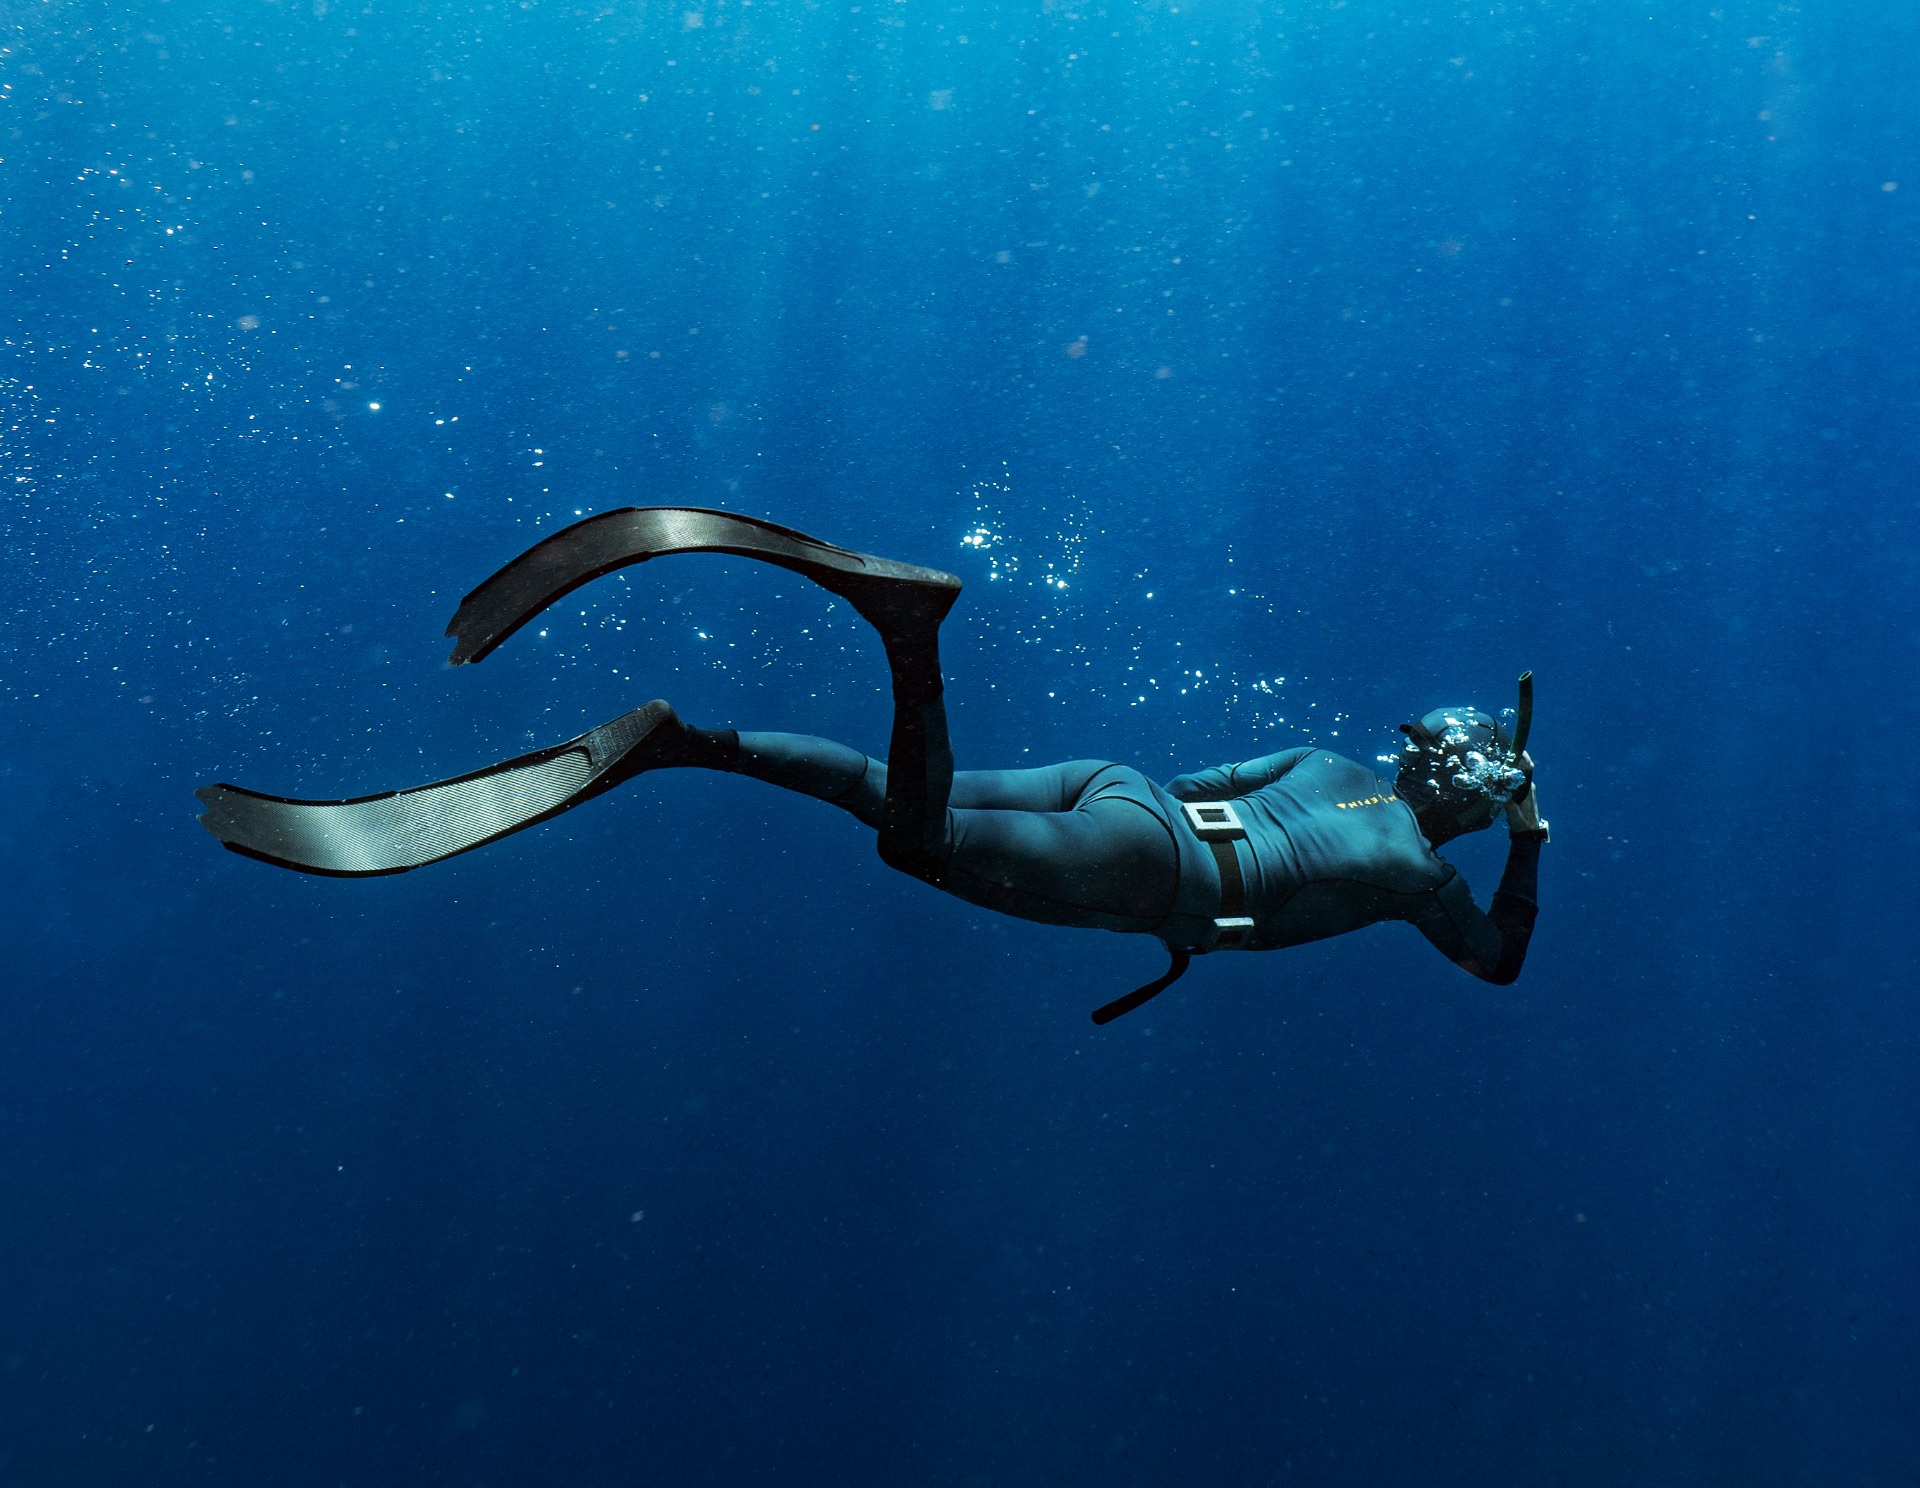 Ninepin Wetsuit’s Beginners Guide to Spearfishing